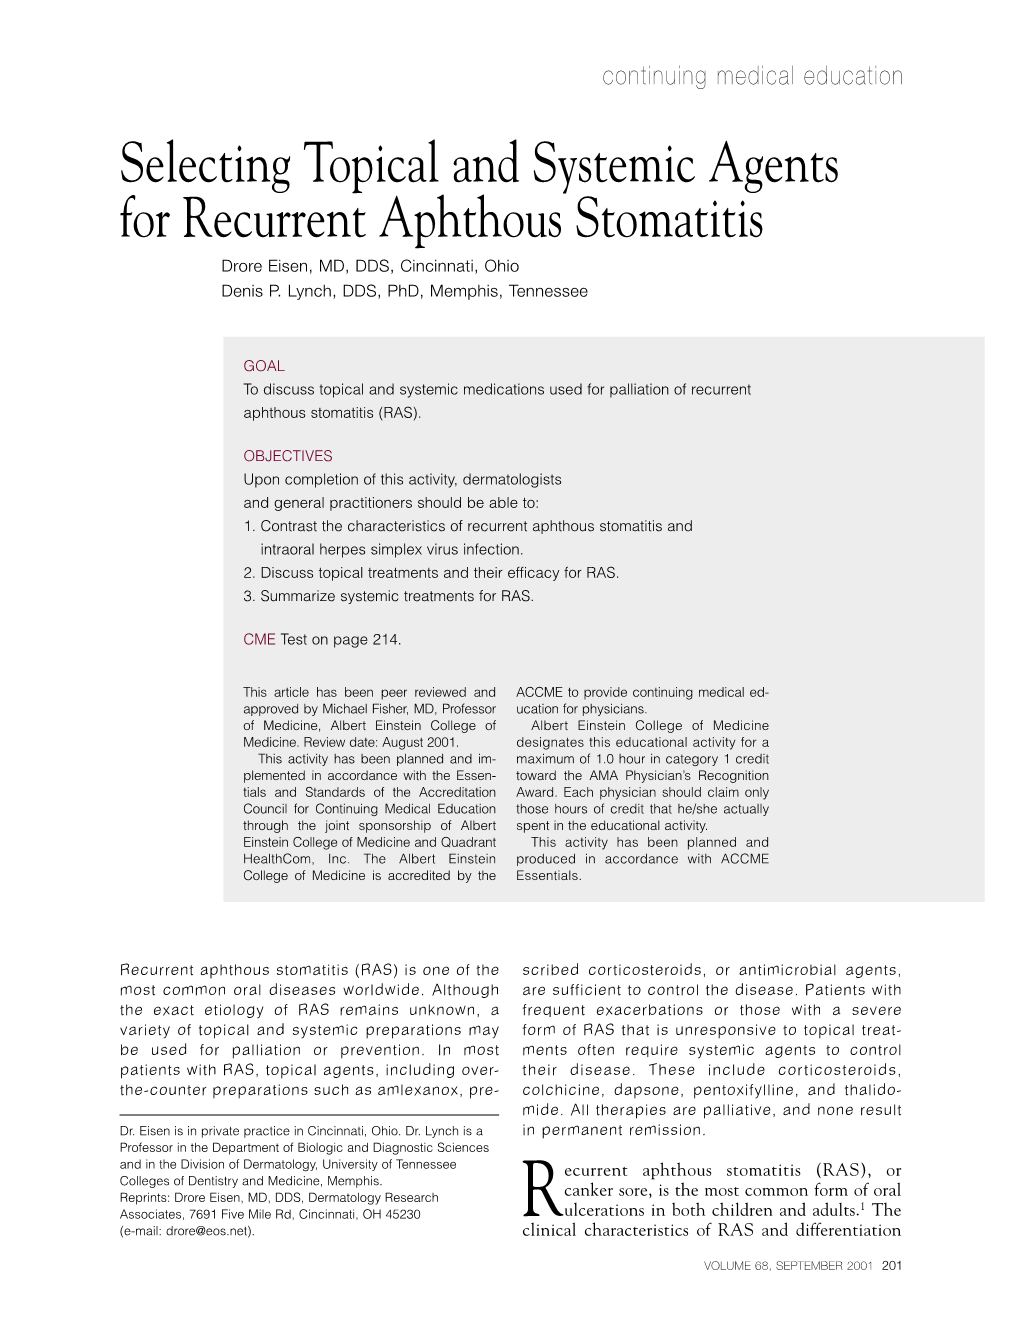 Selecting Topical and Systemic Agents for Recurrent Aphthous Stomatitis Drore Eisen, MD, DDS, Cincinnati, Ohio Denis P